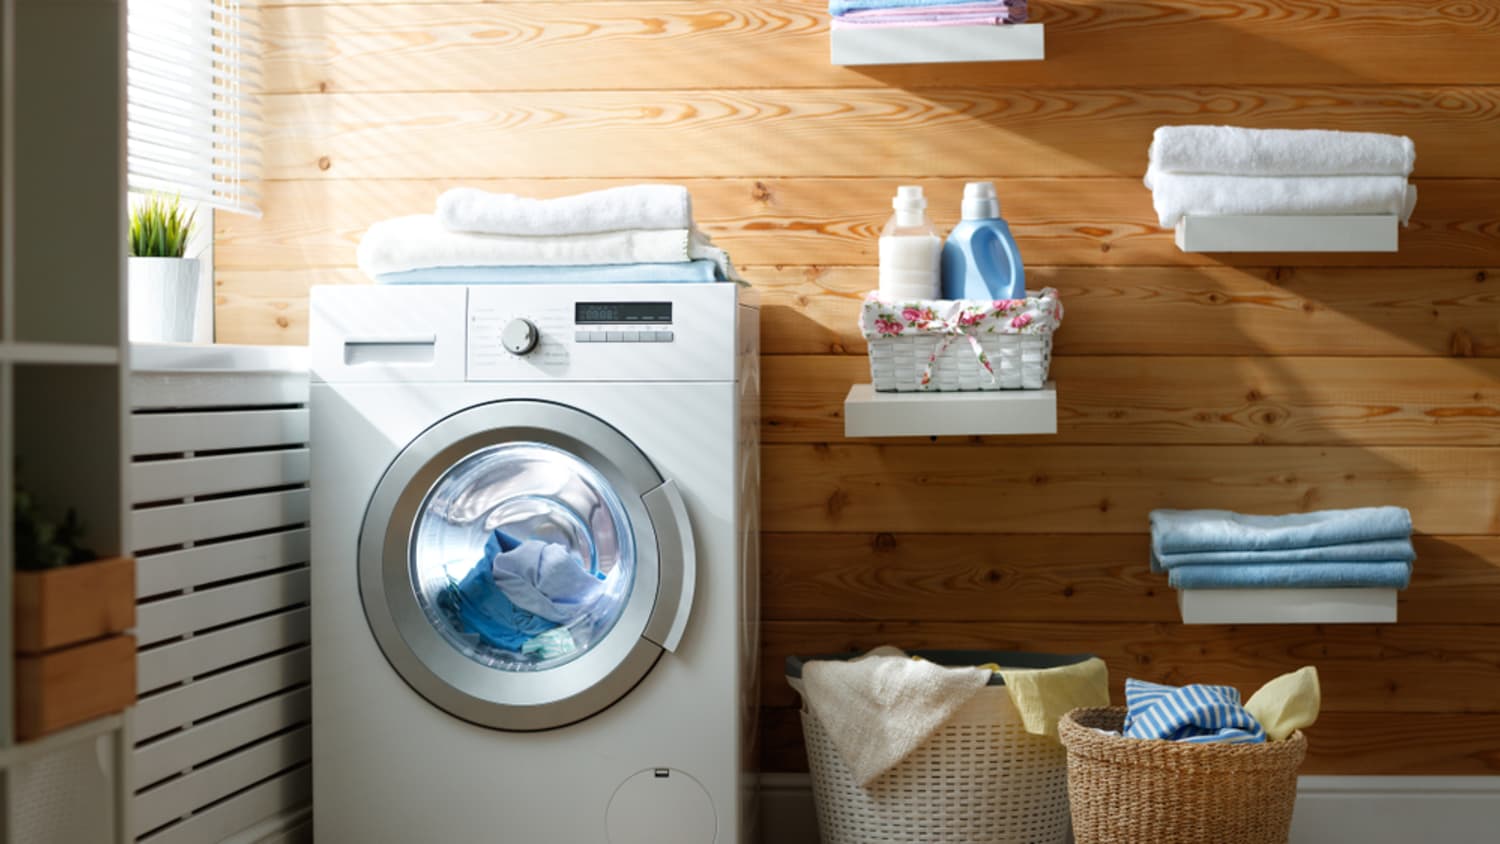 The Tidy Cup Makes Doing Laundry so Much Easier